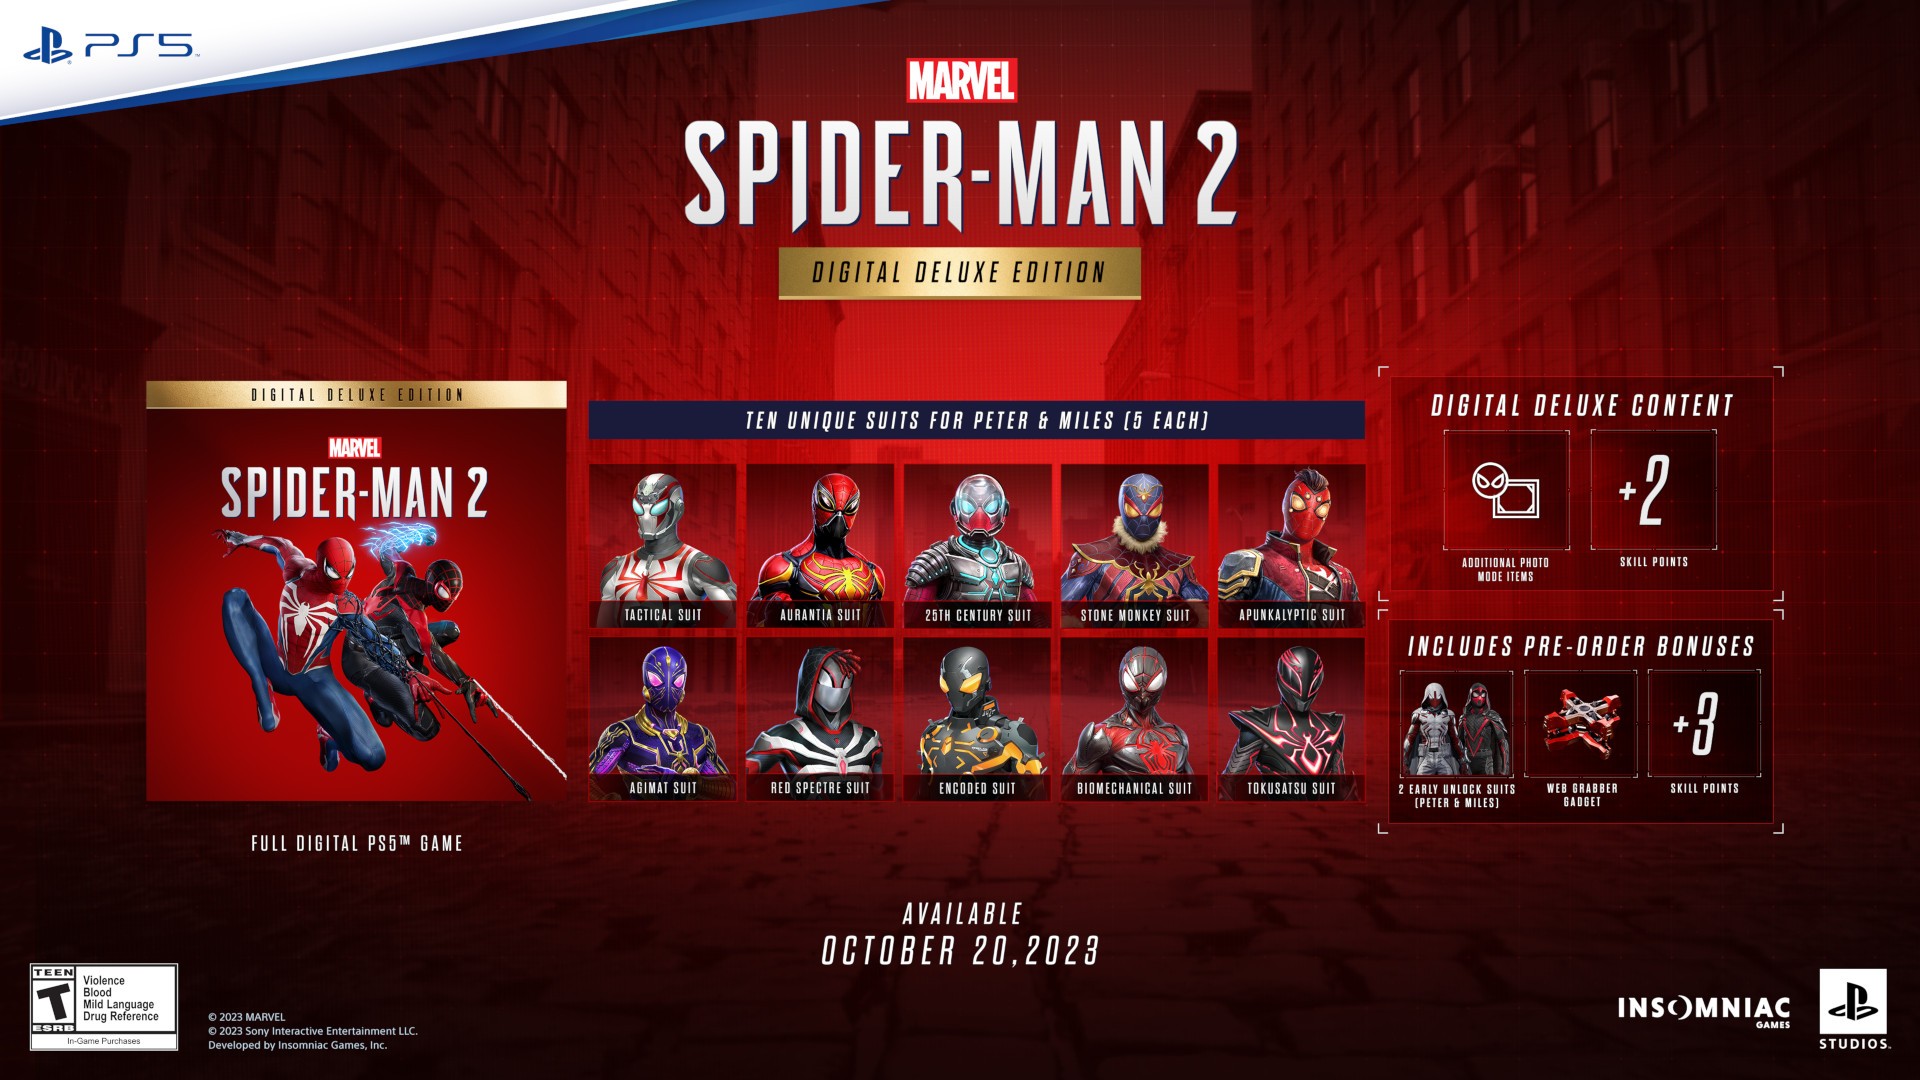 Marvels Spiderman GAME OF THE YEAR EDITION (Steam) Price in India - Buy  Marvels Spiderman GAME OF THE YEAR EDITION (Steam) online at